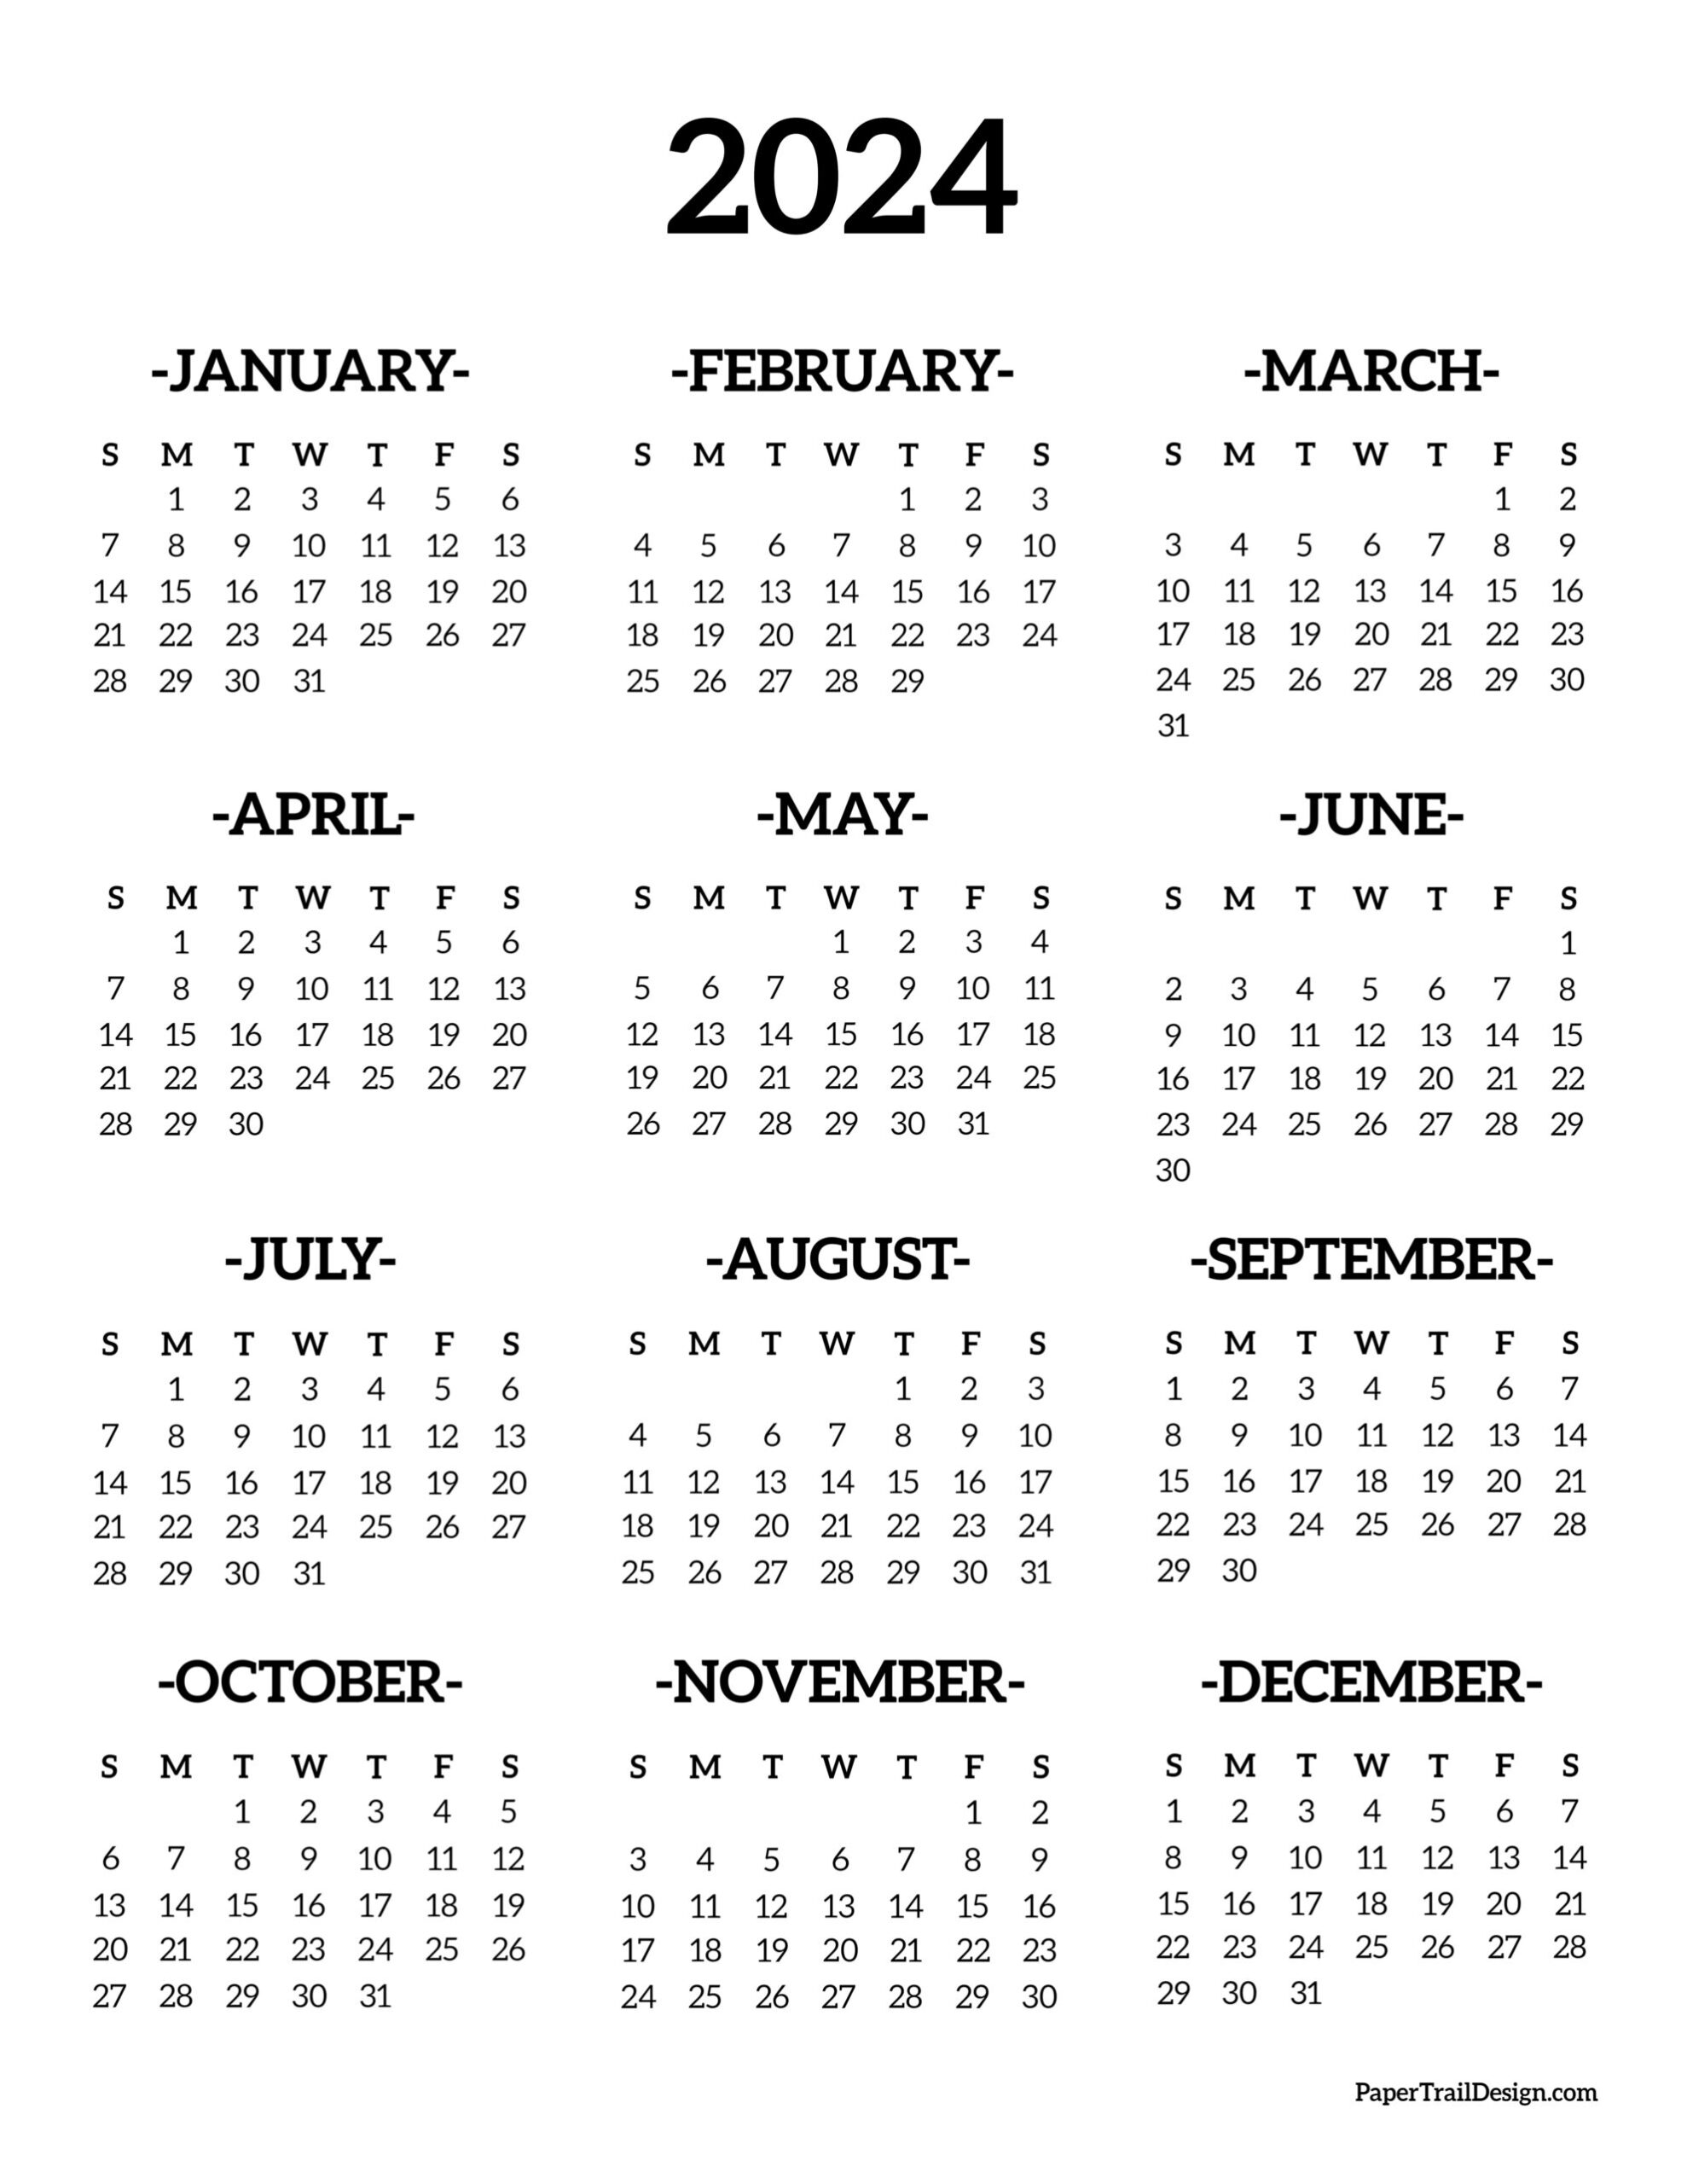 Calendar 2024 Printable One Page - Paper Trail Design for 2024 And 2024 Calendar Free Printable